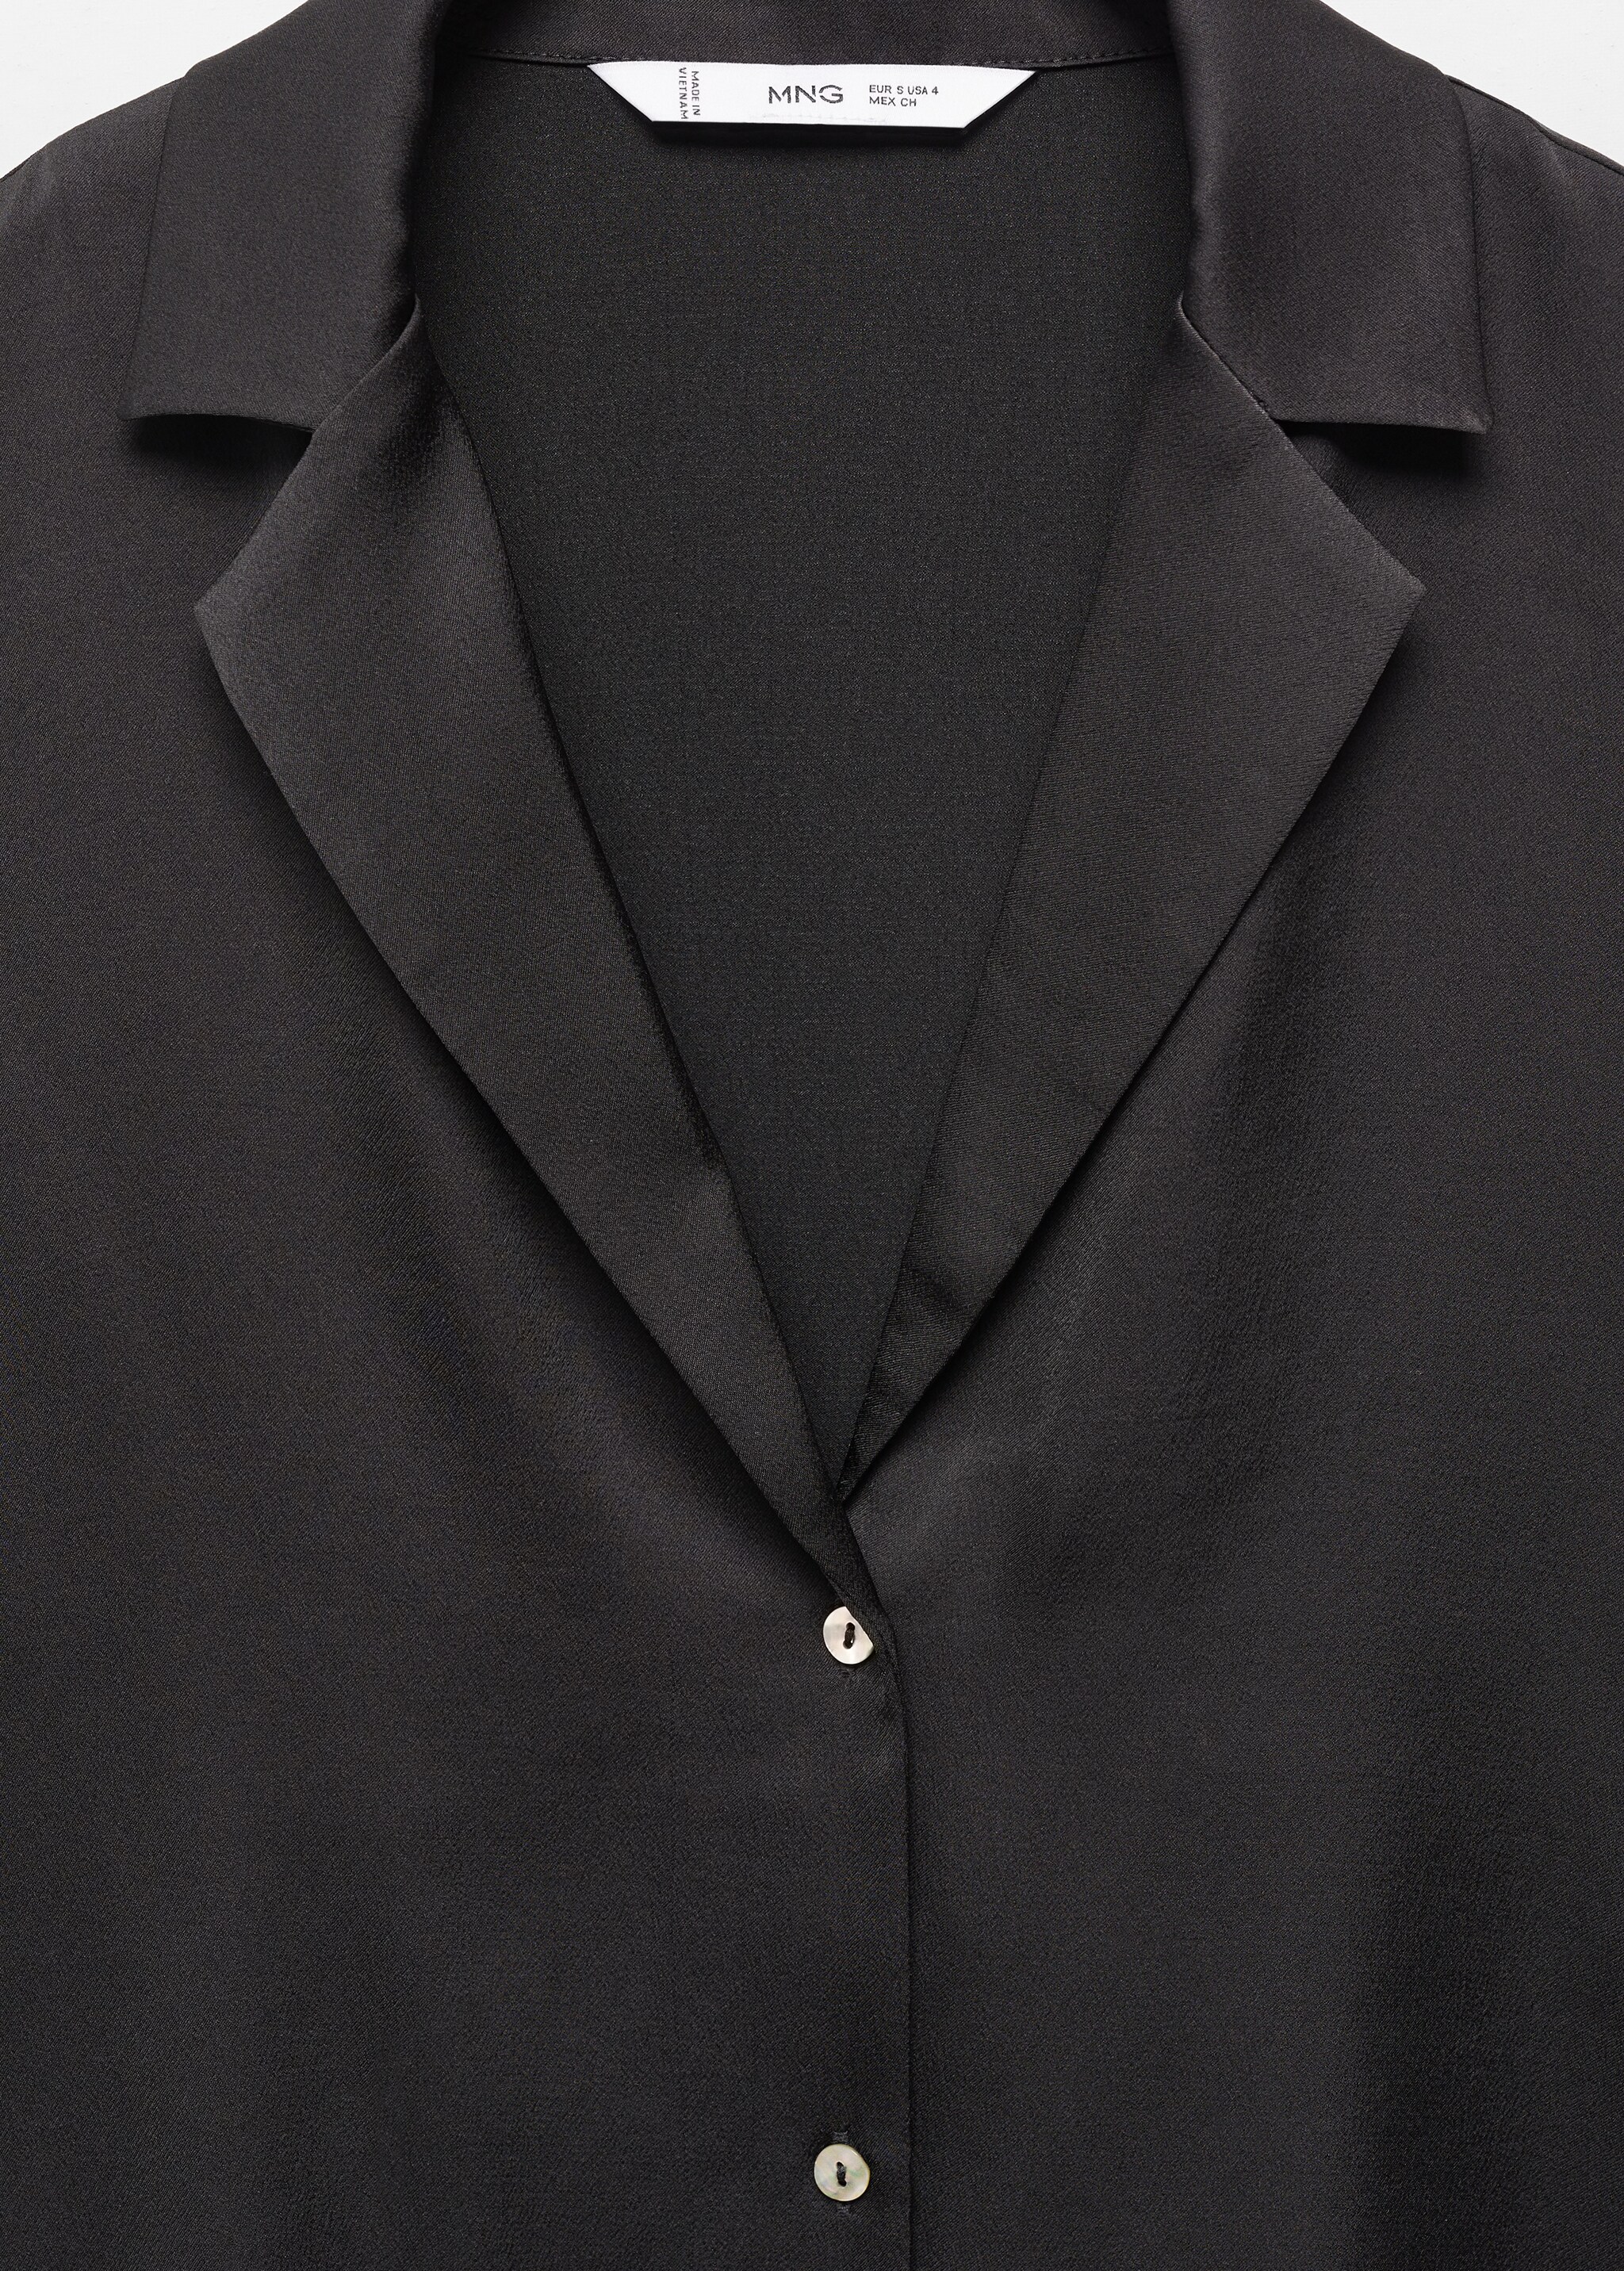 Short-sleeved satin shirt - Details of the article 8